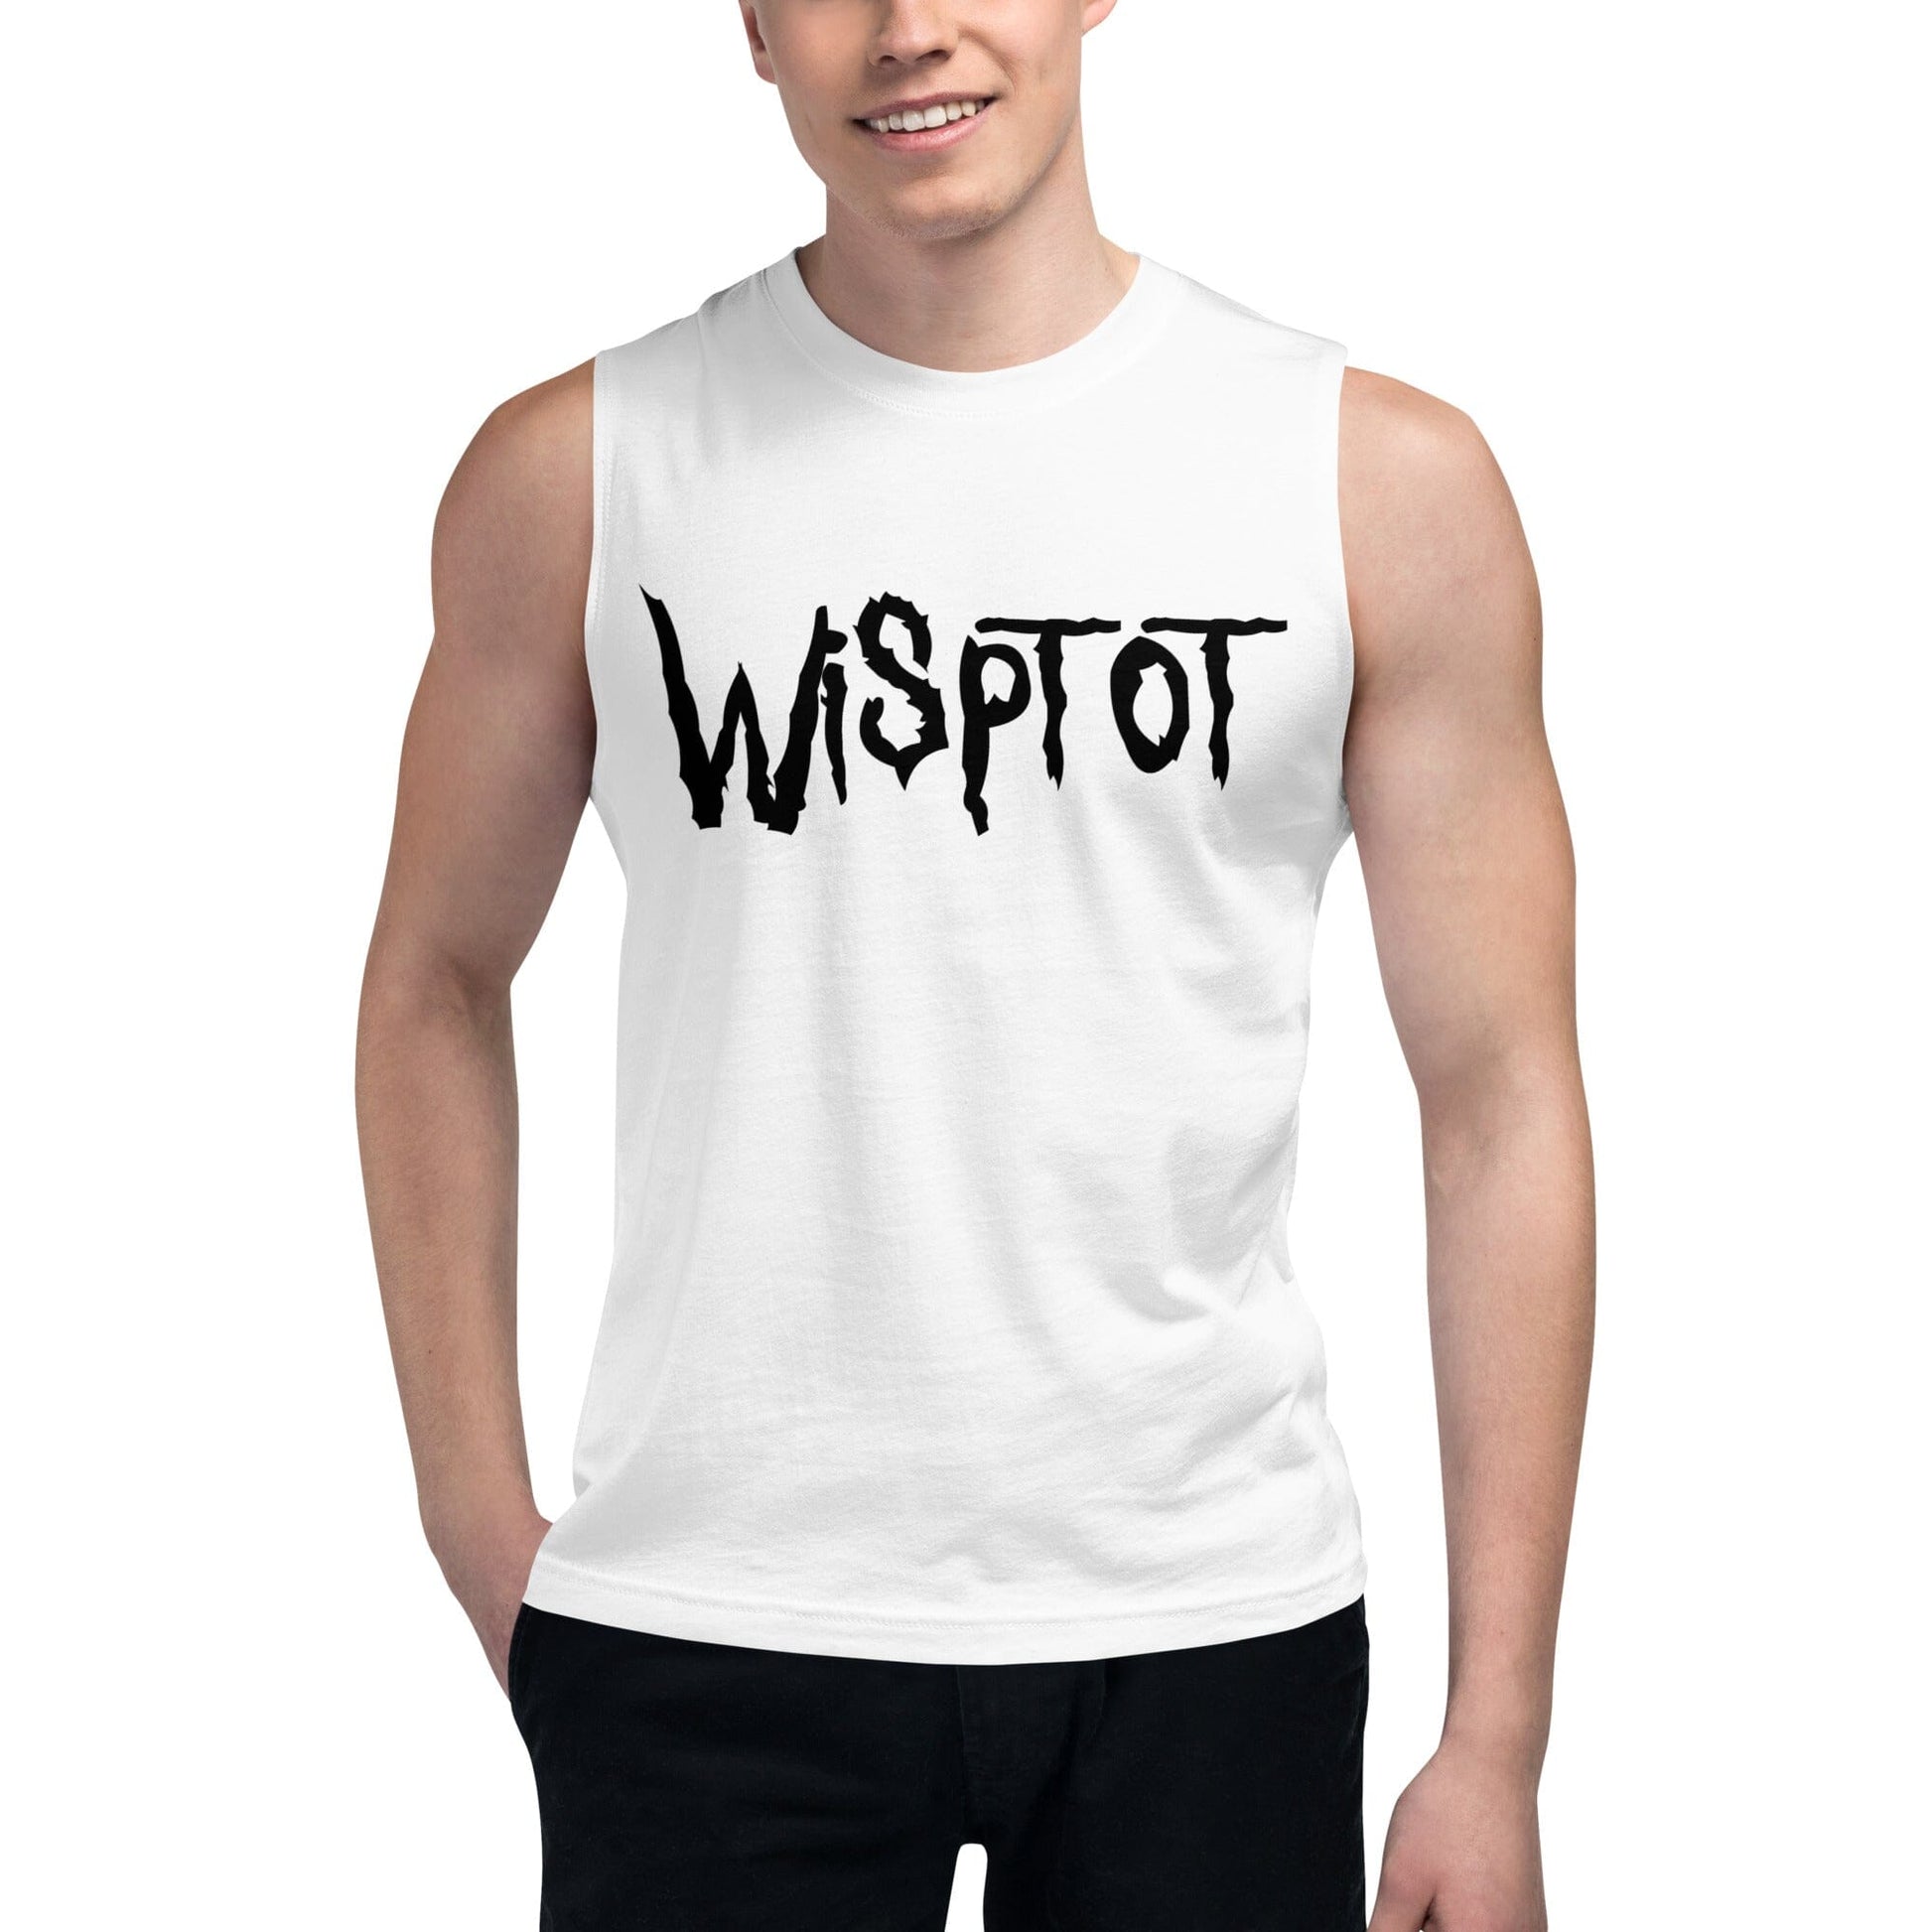 WispTot Muscle Shirt [Unfoiled] (All net proceeds go to equally to Kitty CrusAIDe and Rags to Riches Animal Rescue) JoyousJoyfulJoyness S 